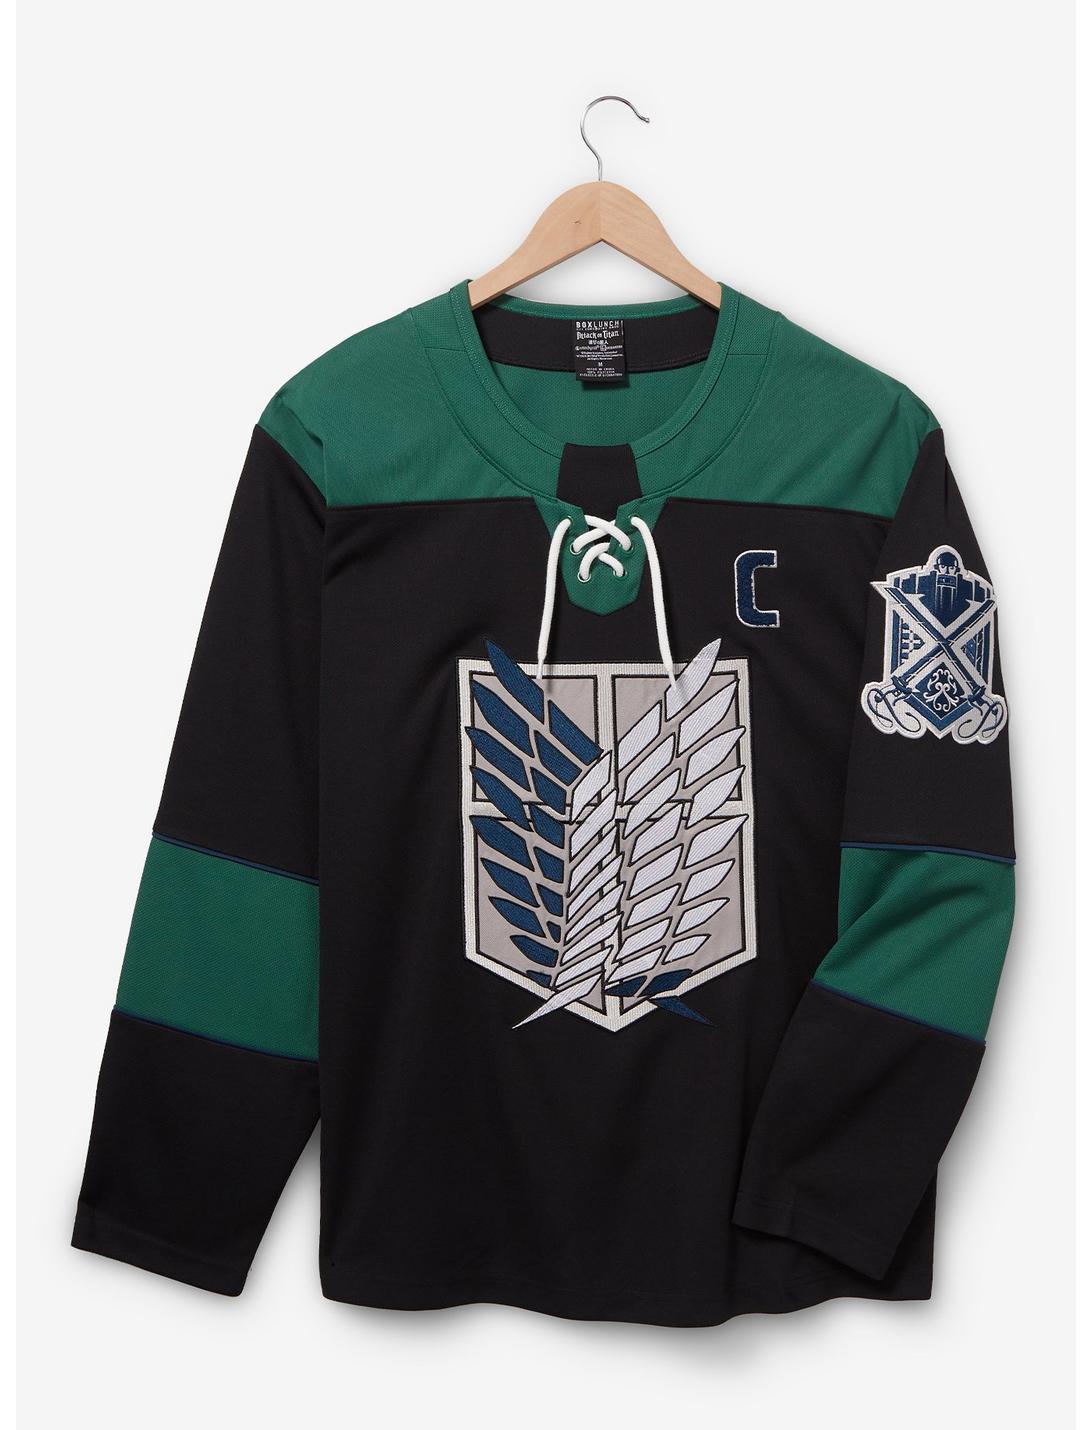 Attack on Titan Captain Levi Hockey Jersey - BoxLunch Exclusive, BLACK, hi-res